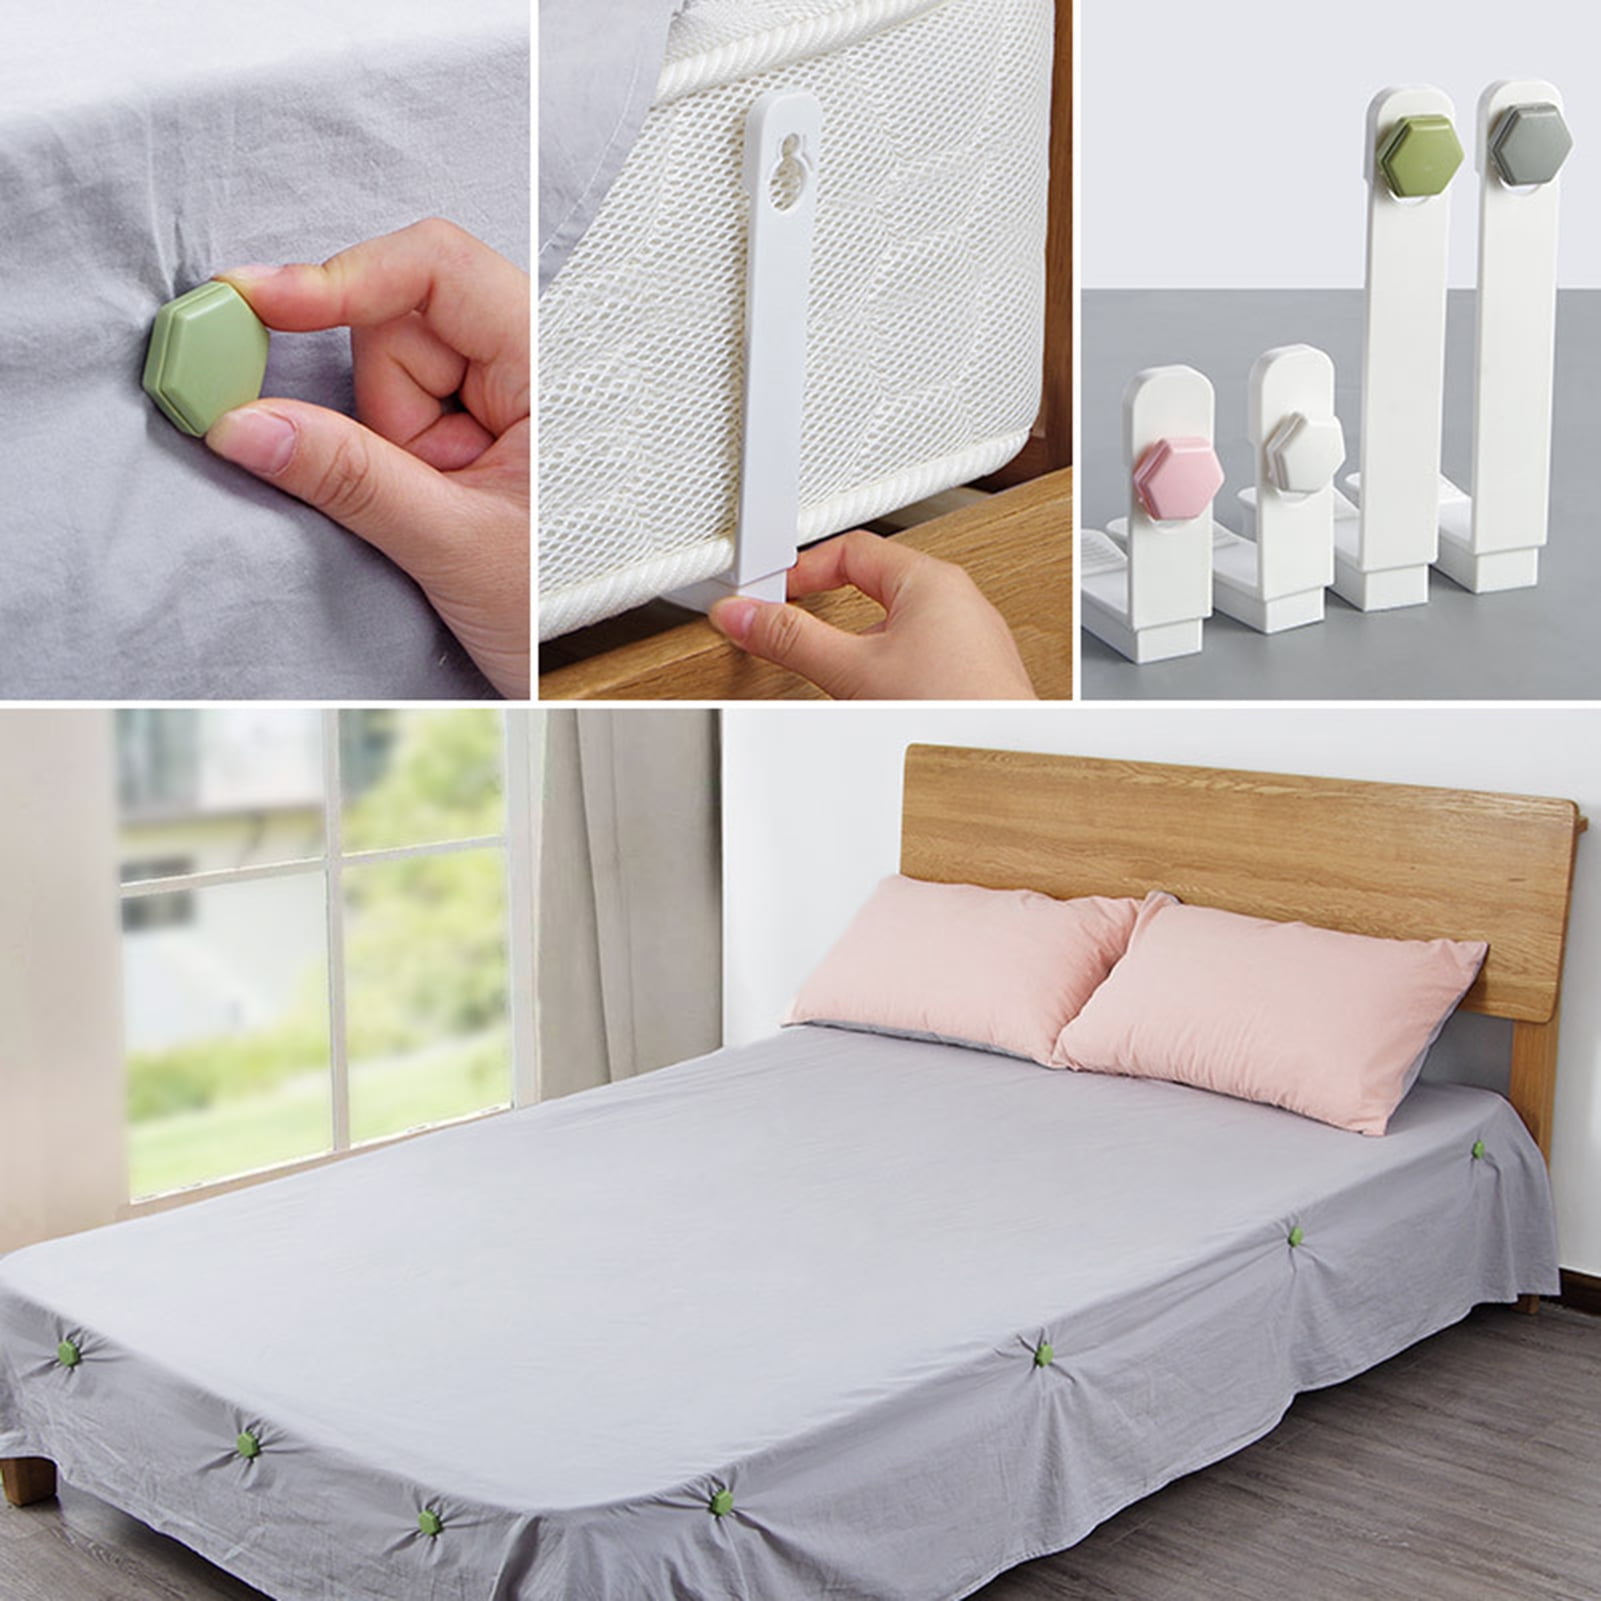 5Pcs/lot Sofa Cushion Gripper Bed Sheet Clip Holder Couch Seat